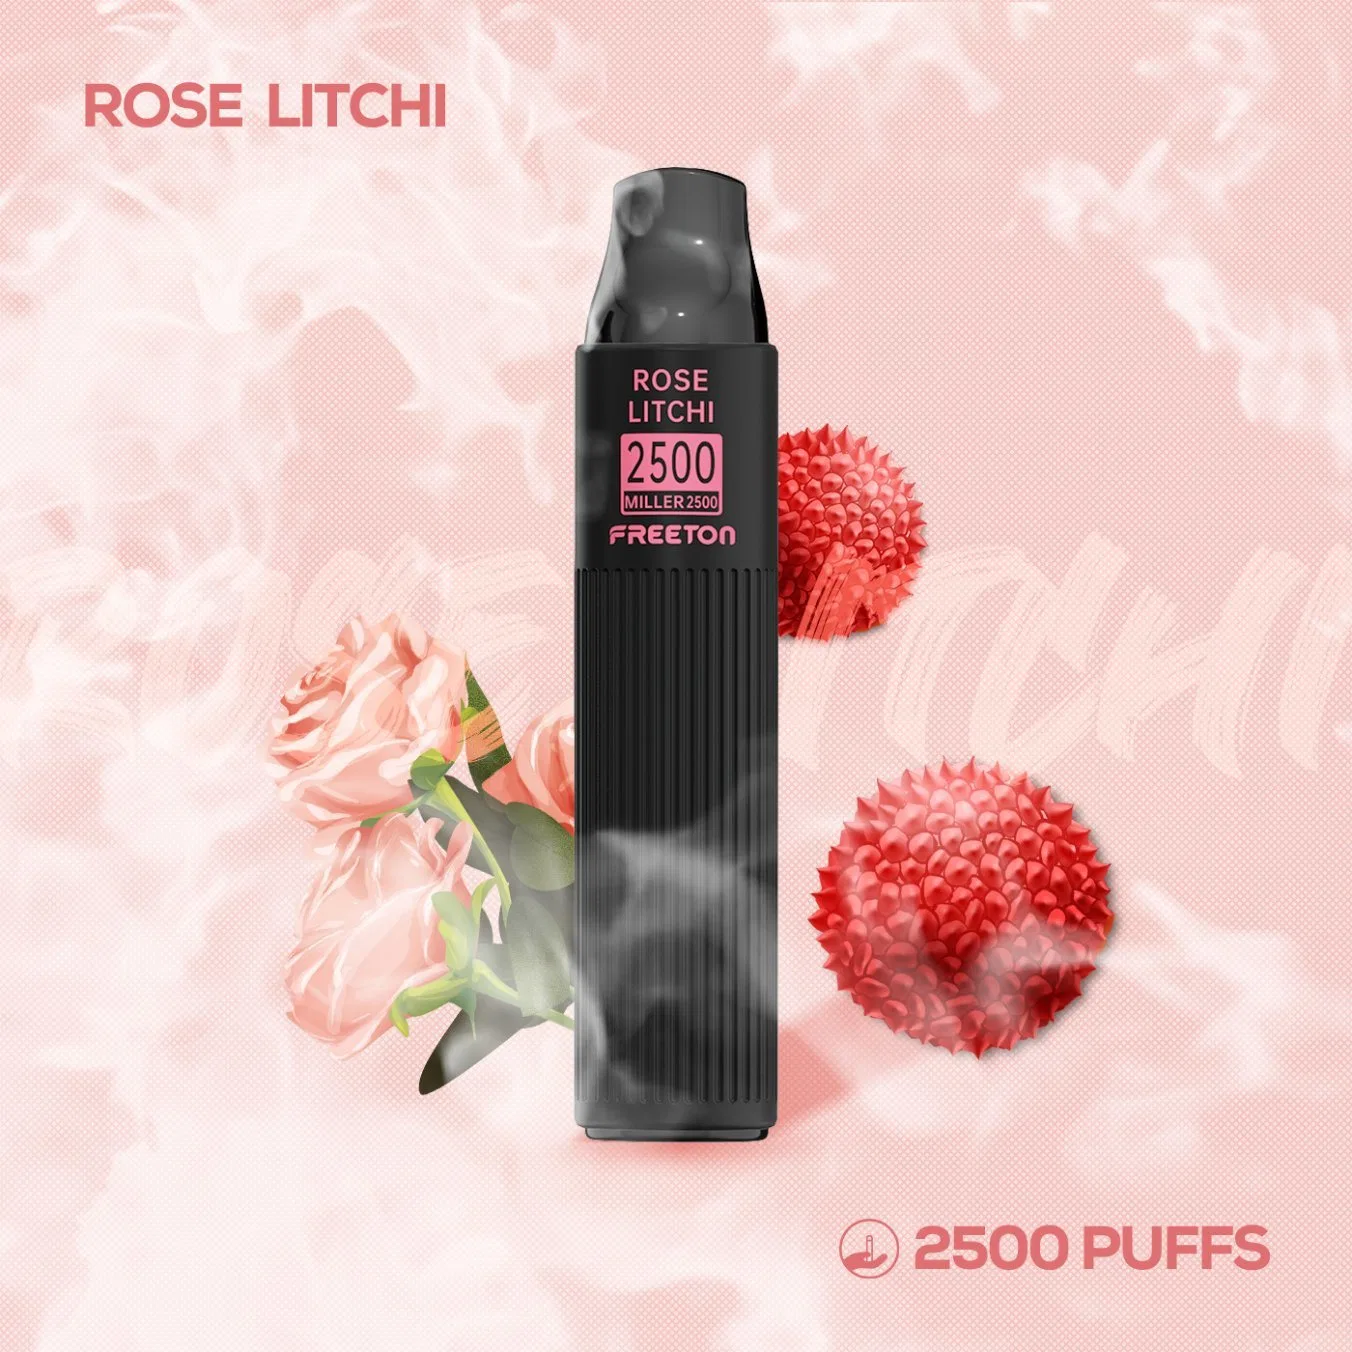 Silicon 2500puff Mesh Coil Nicotine Free vapes Vape Pen Price Vape Juice Dry Free vapes Vape Pen Price Vape Juice Dry Herb Vaporizer Pod Vaporizer